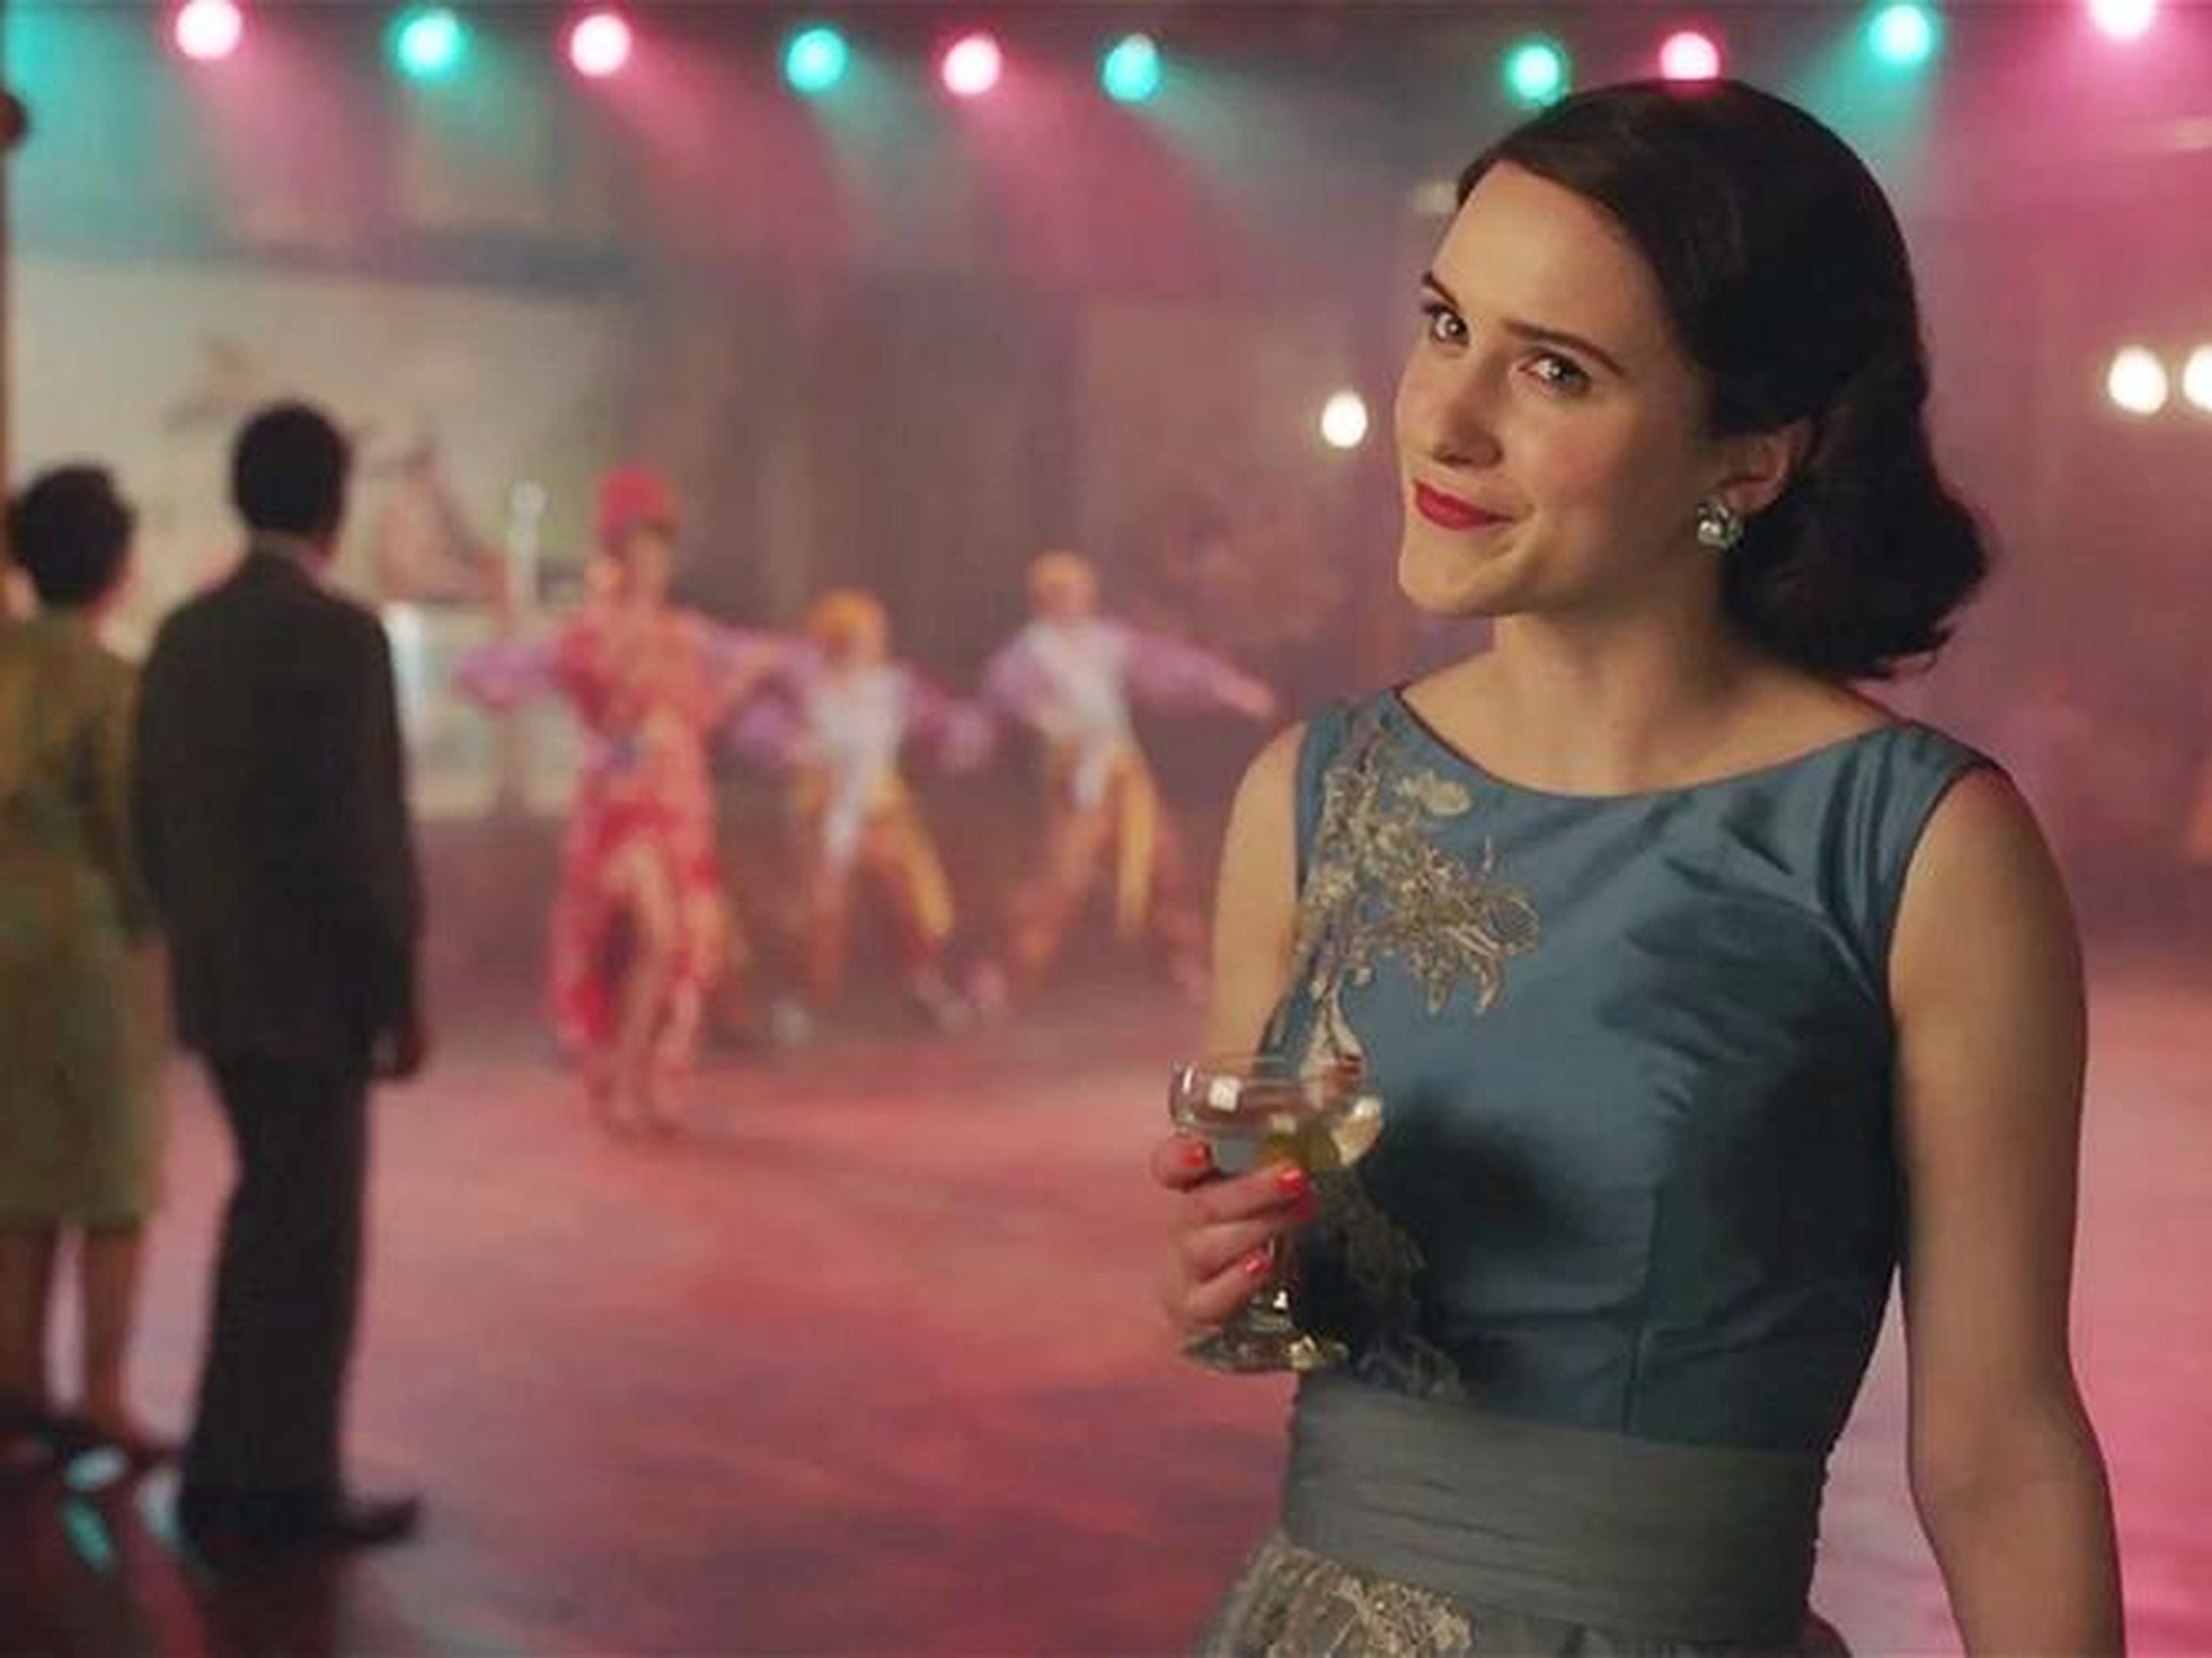 Rachel Brosnahan won an Emmy for her starring role on the Amazon comedy.